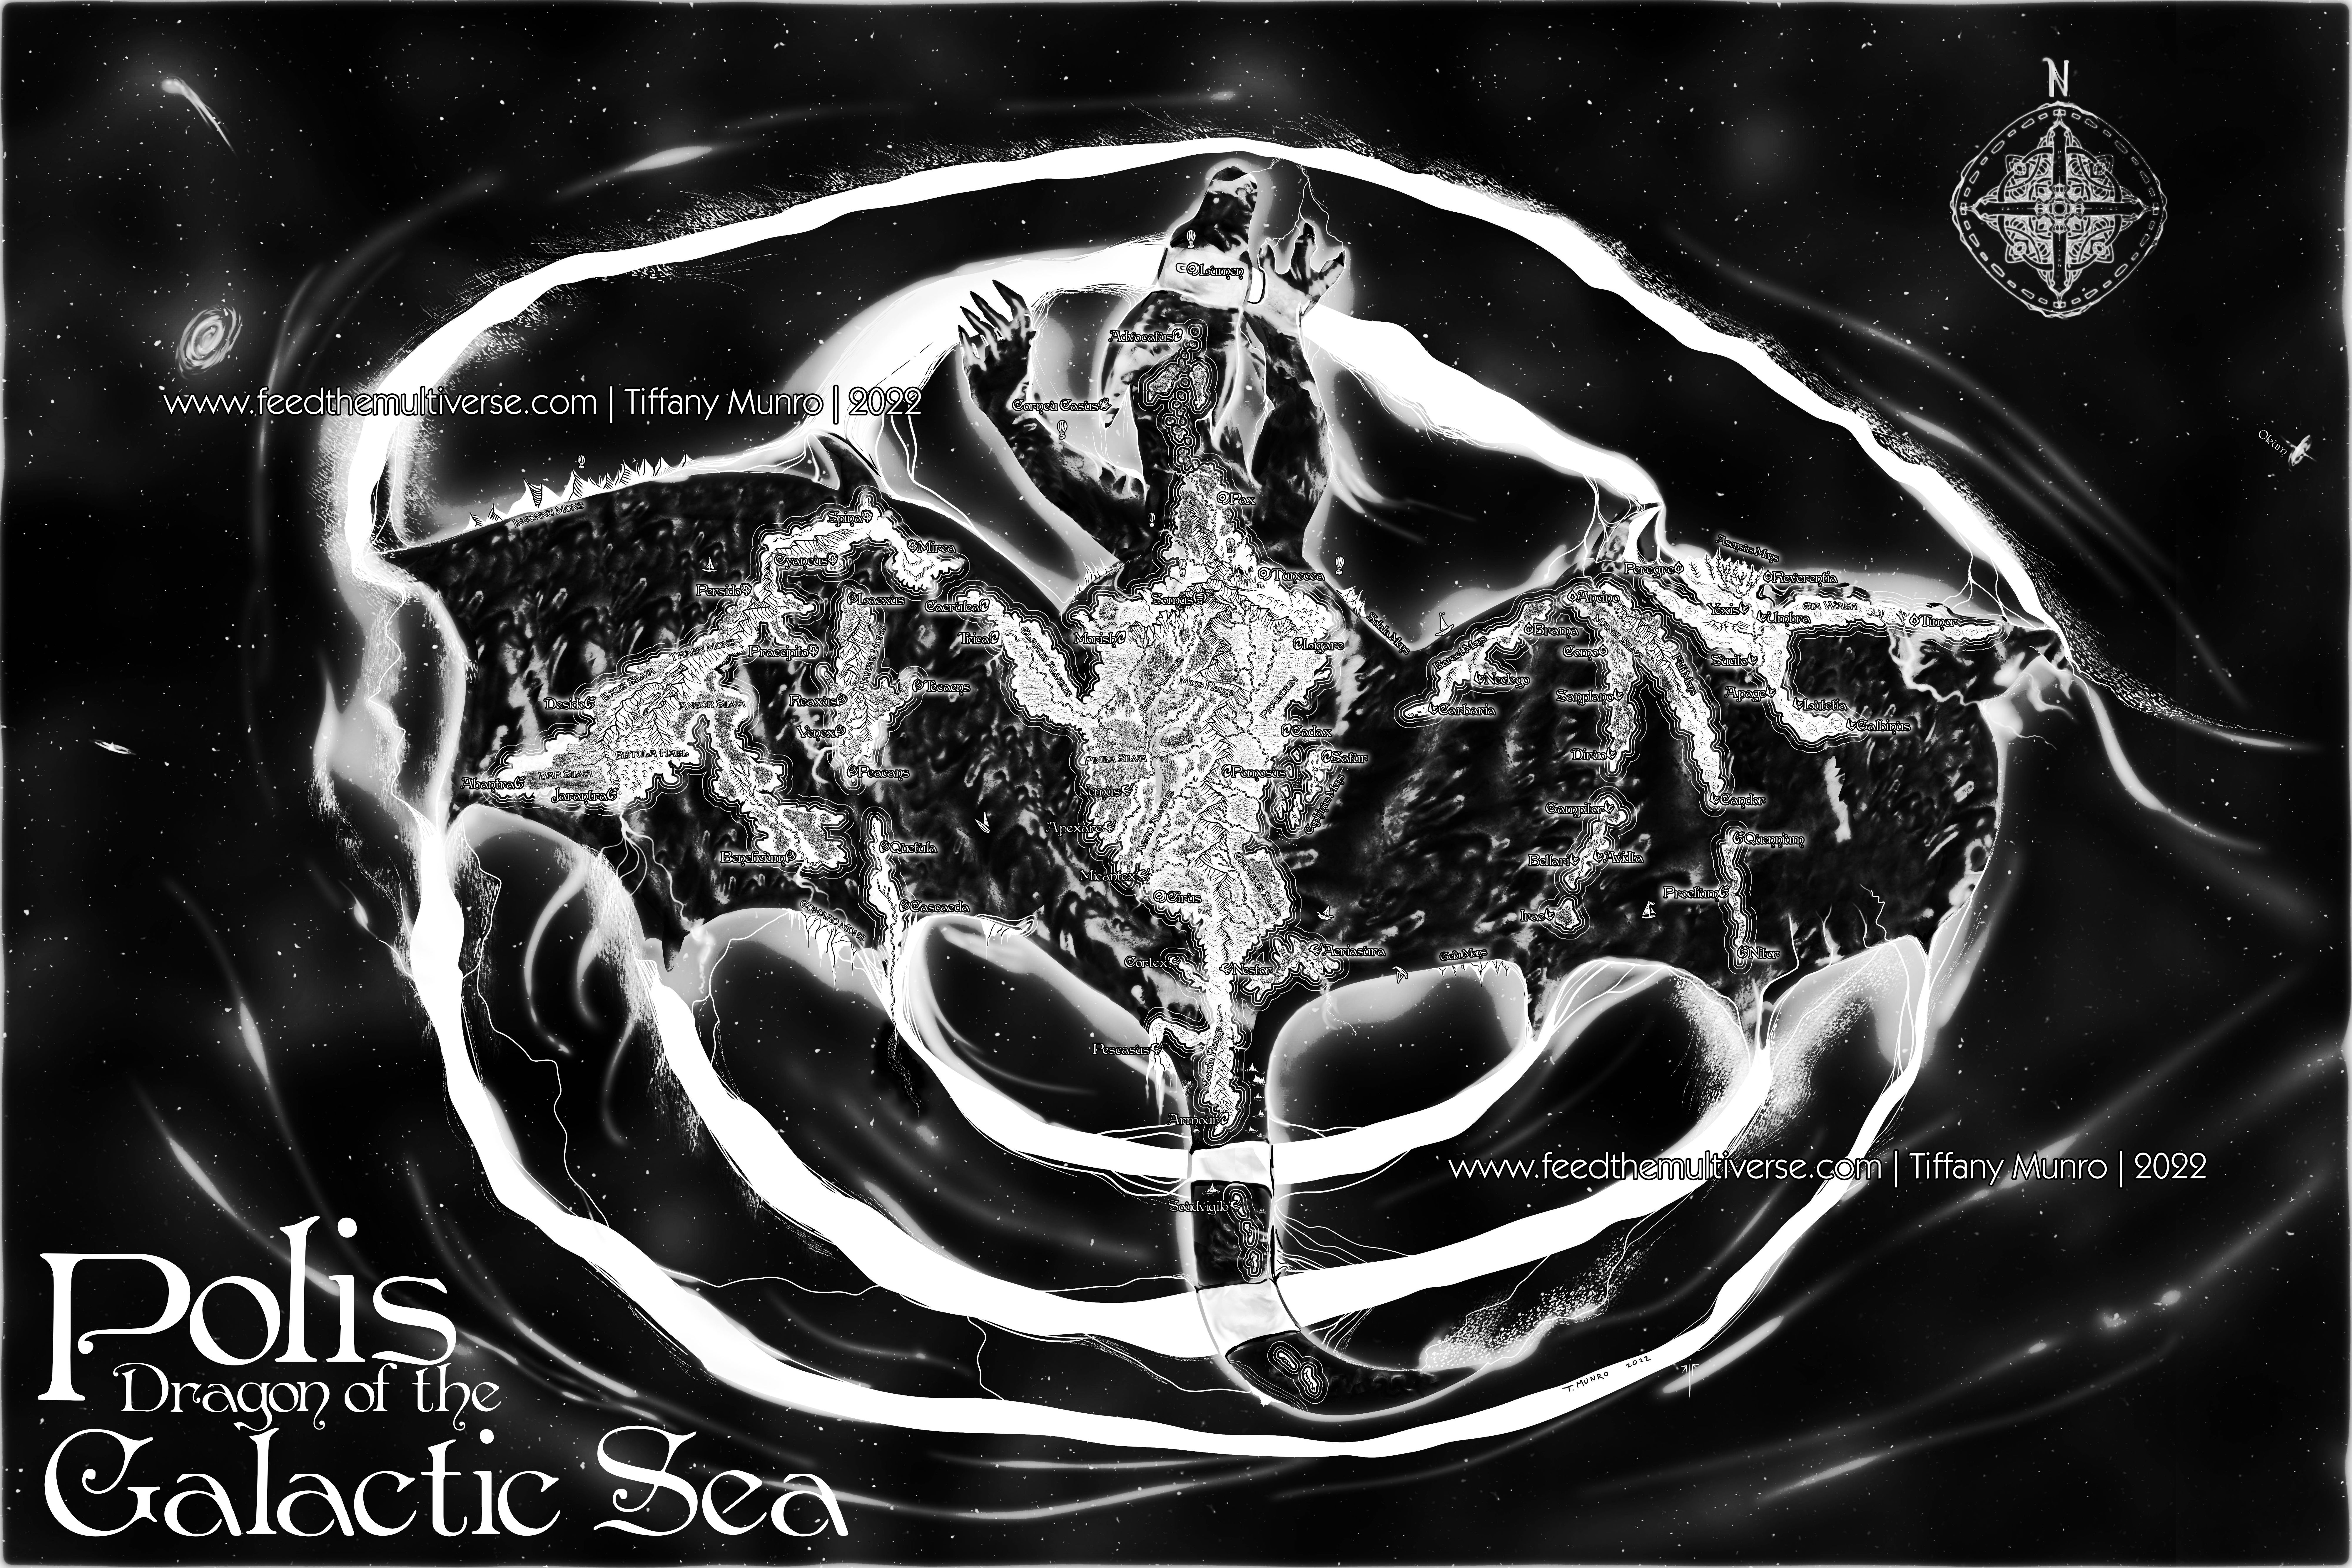 Polis the Dragon of the Galactic Sea inked fantasy map world on a dragon's back